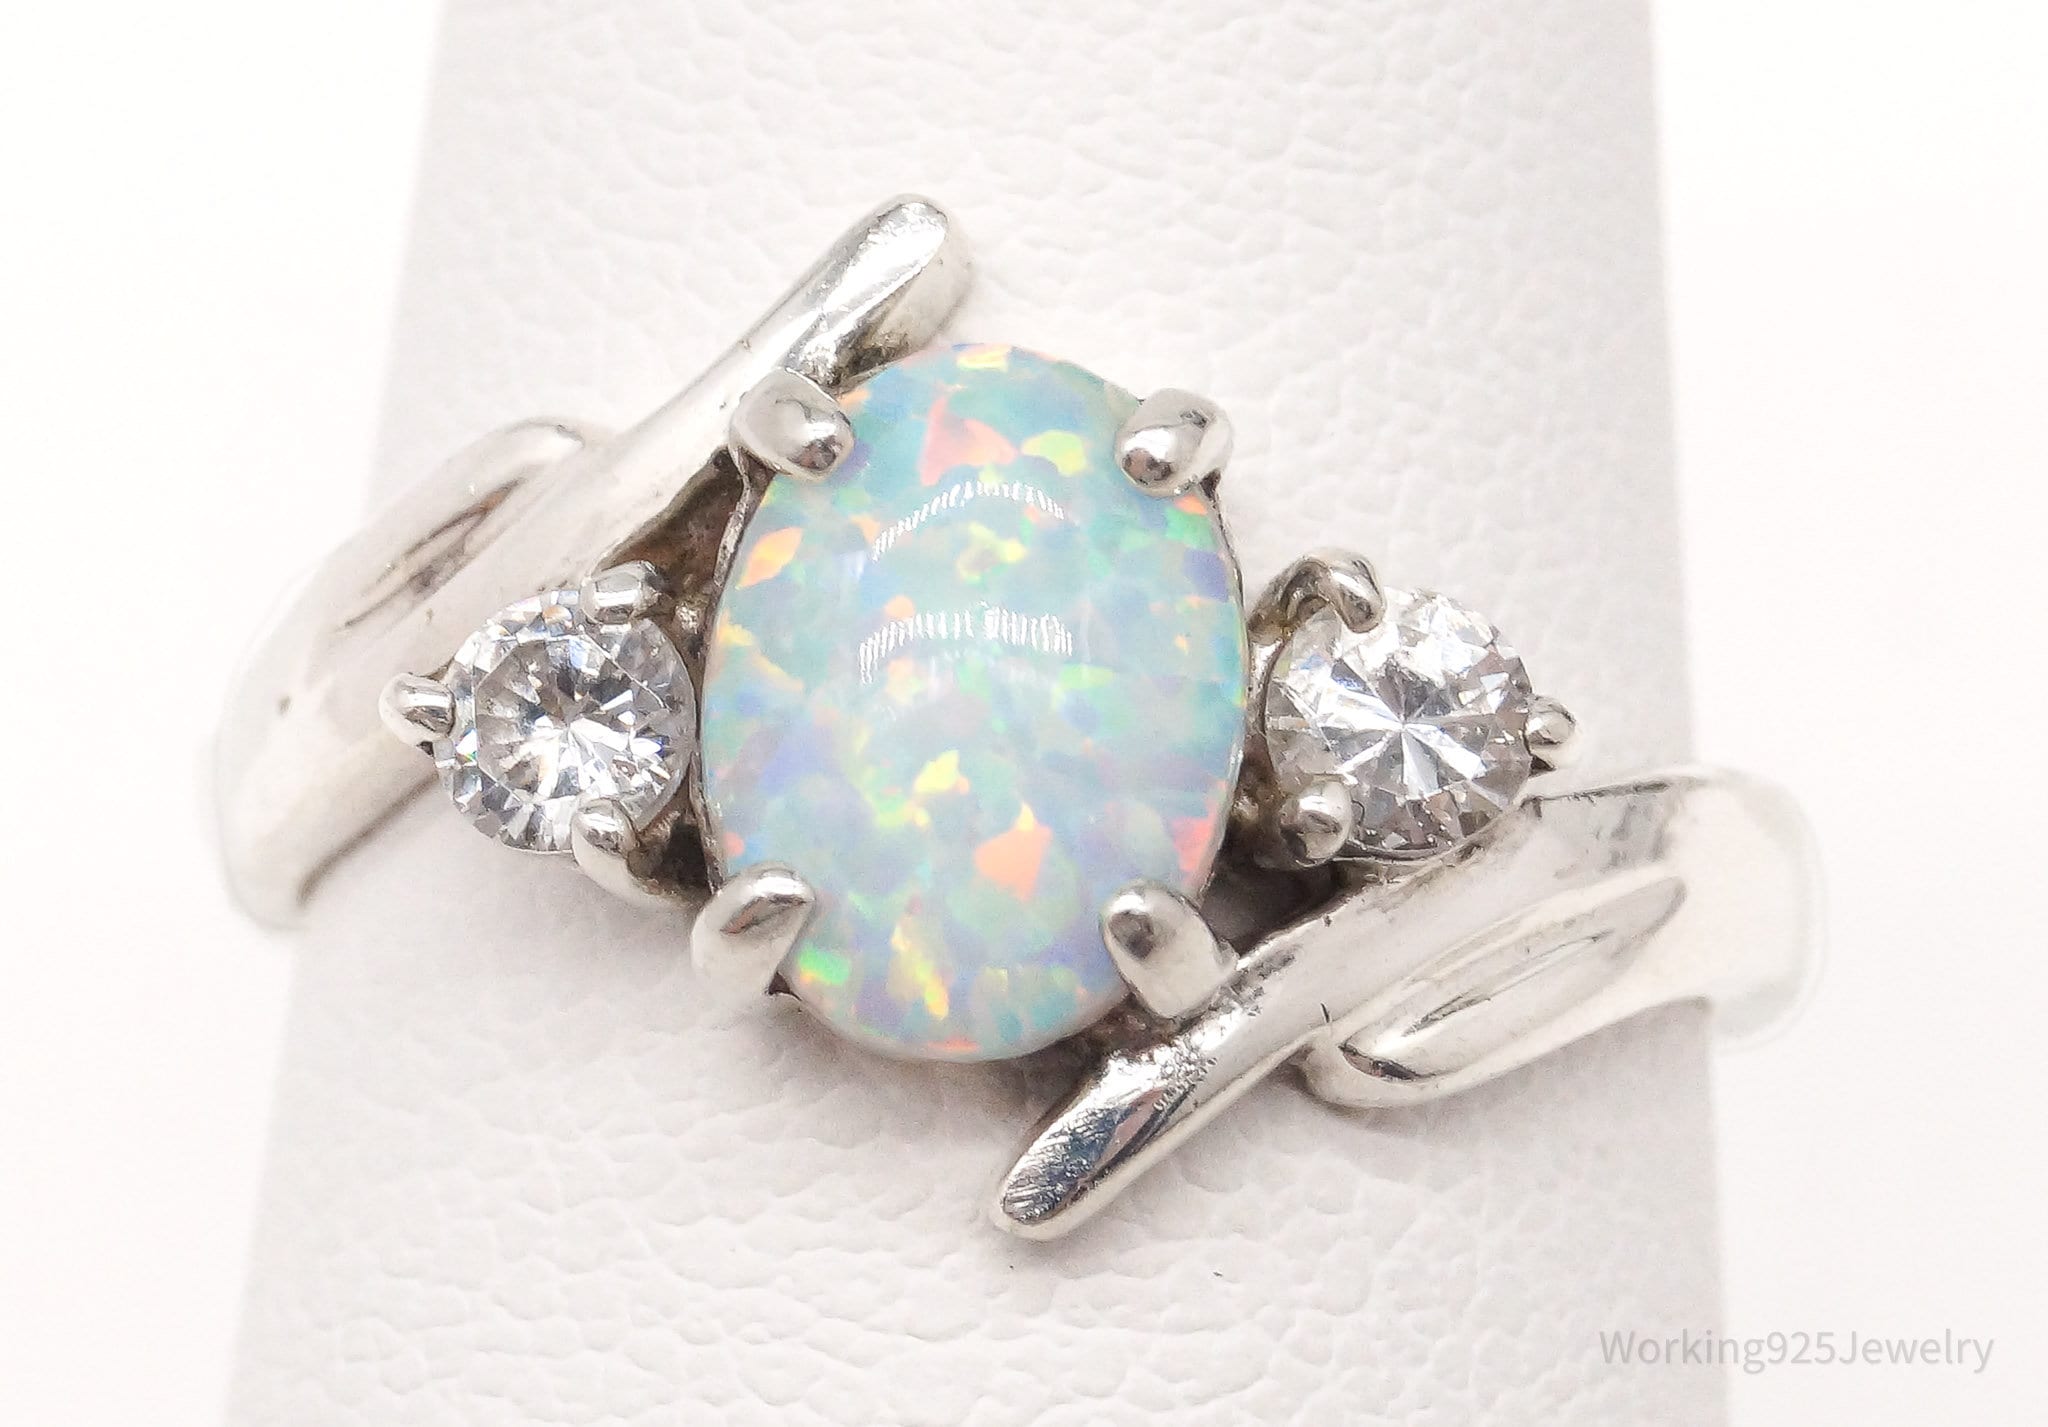 Vintage Opal Cubic Zirconia Sterling Silver Ring - Size 6.25